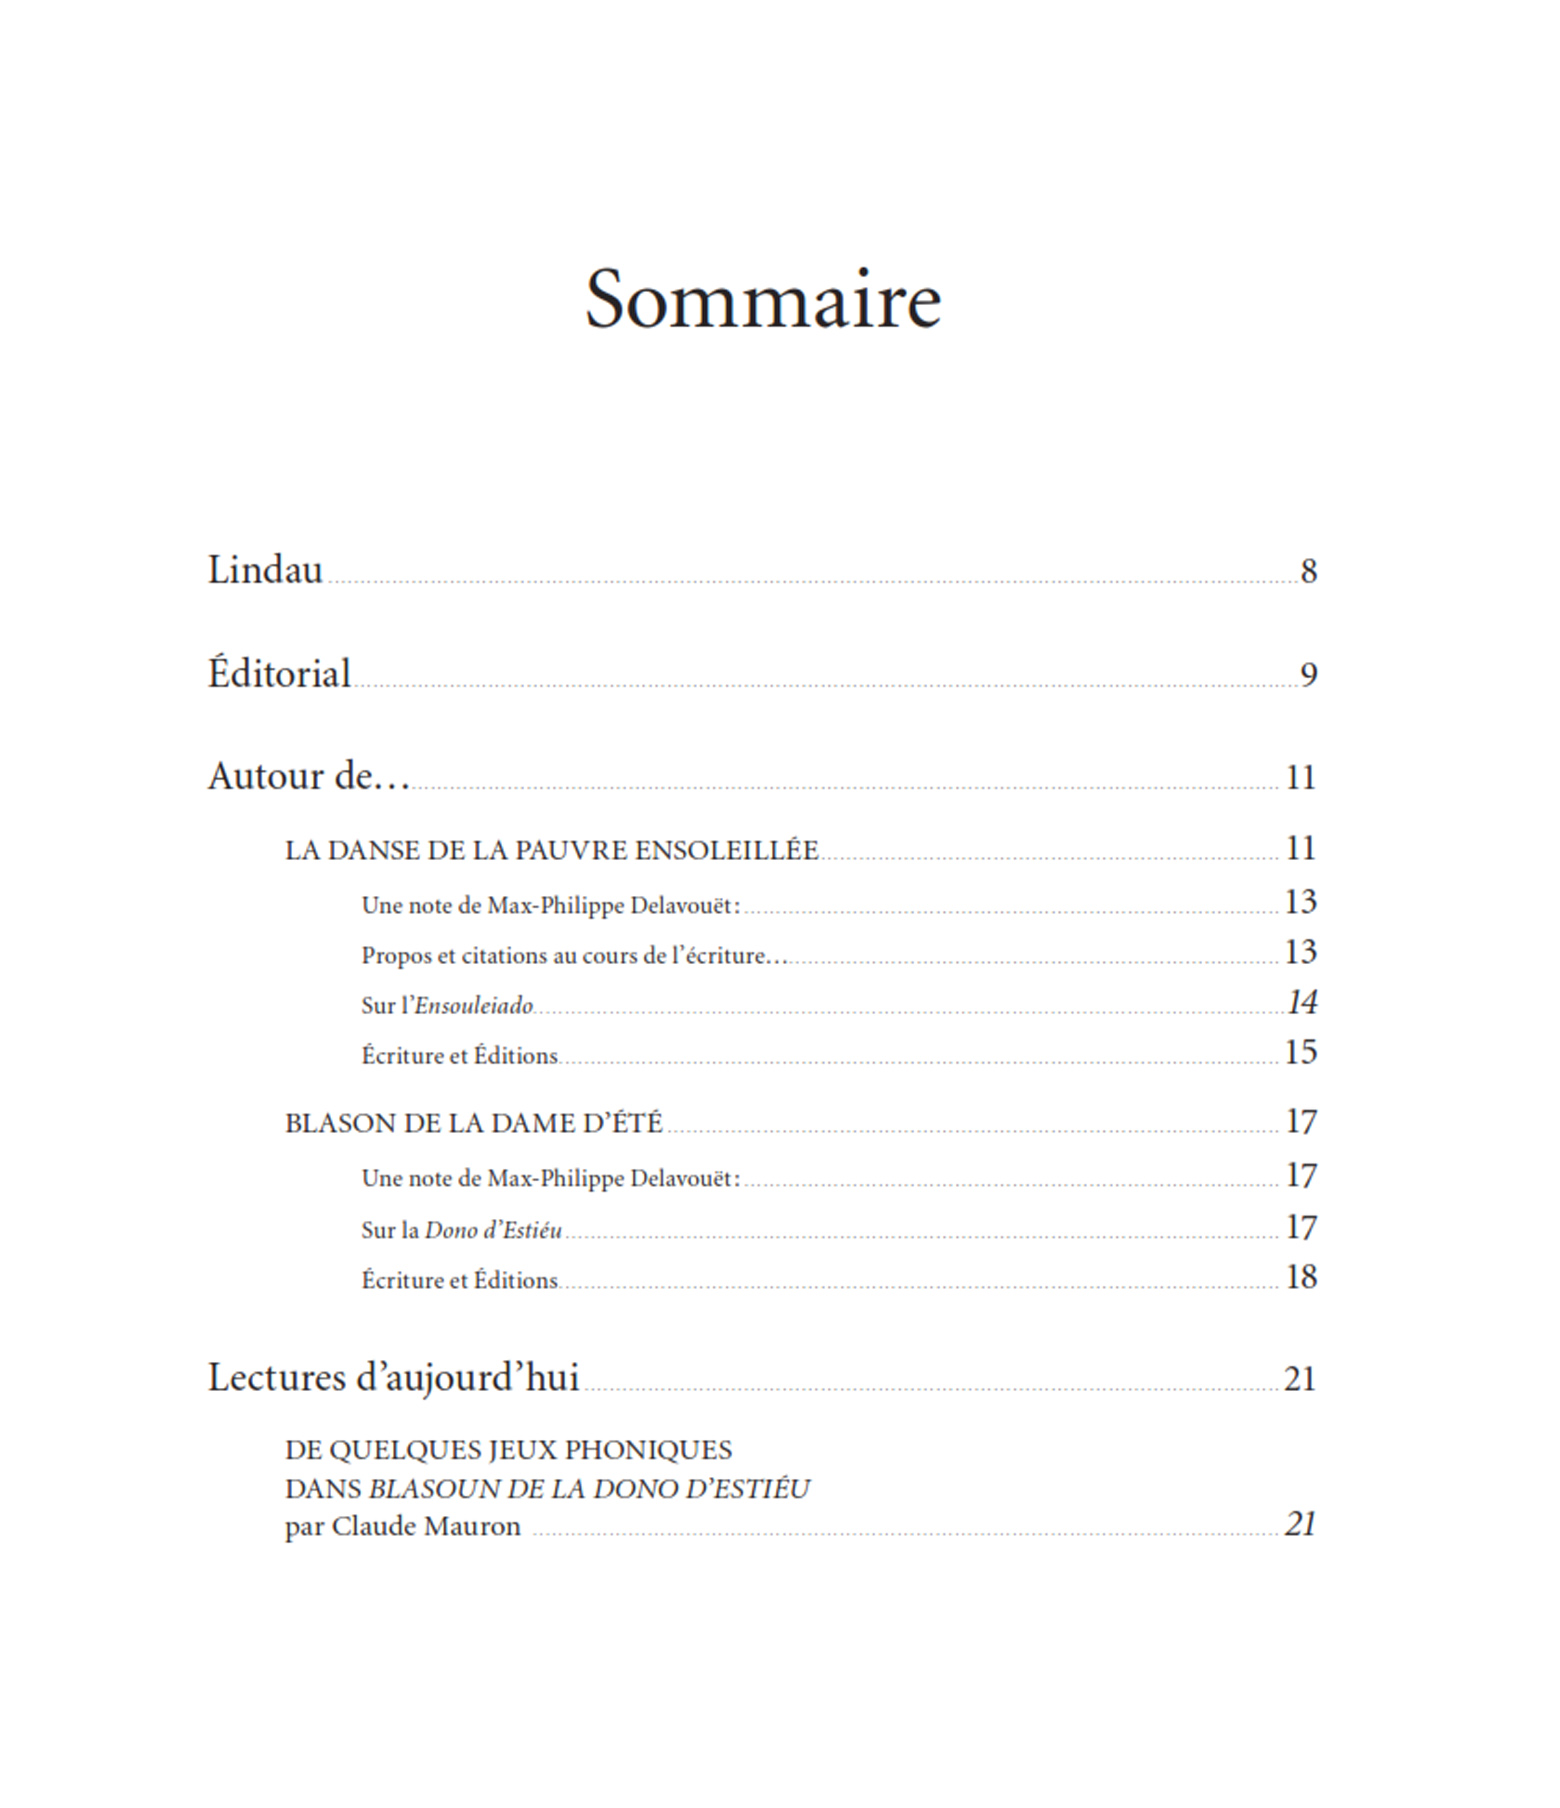 Cahiers9 sommaire1_008